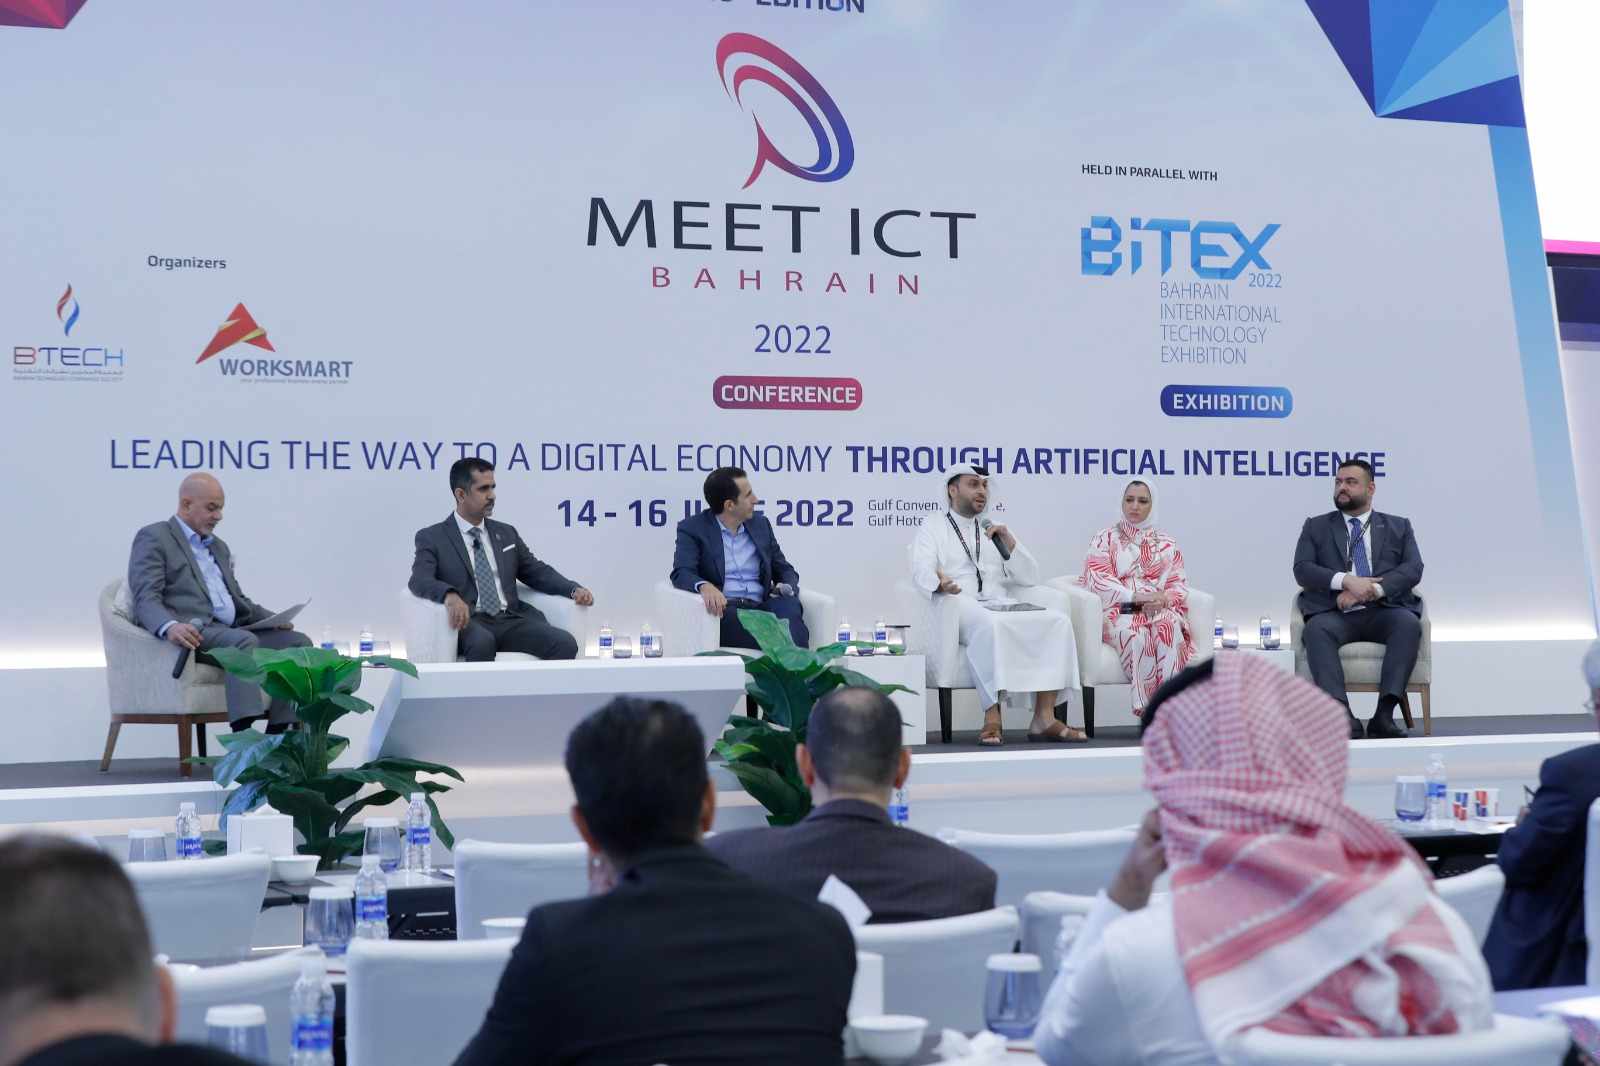 Meet ICT Conference Bahrain 2022 in Manama, Bahrain  for IT & Technology - Image 1